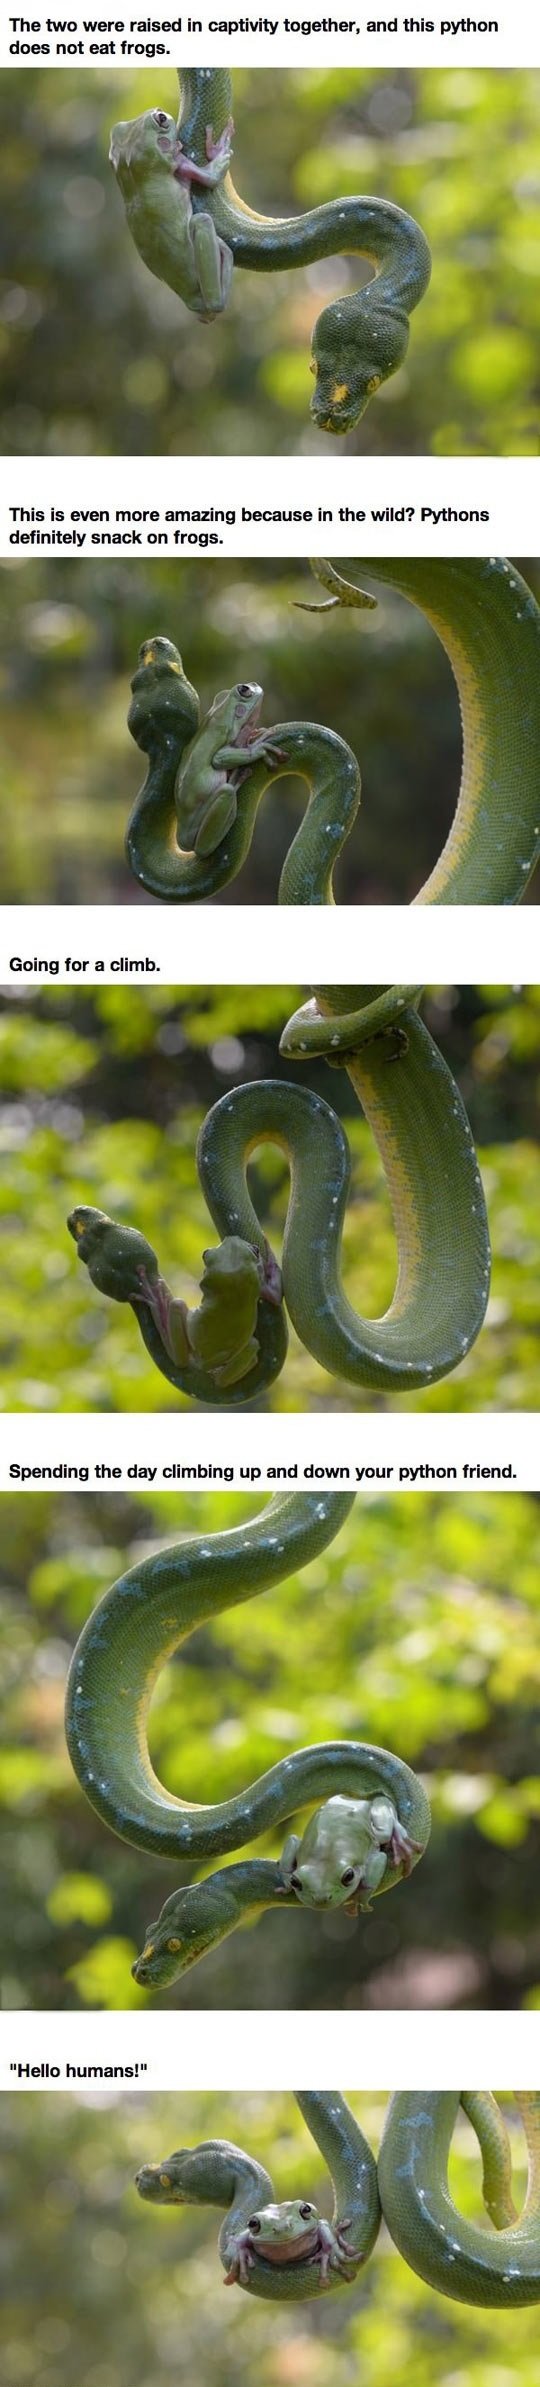 relationship memes snake - The two were raised in captivity together, and this python does not eat frogs. This is even more amazing because in the wild? Pythons definitely snack on frogs. Going for a climb. Spending the day climbing up and down your pytho